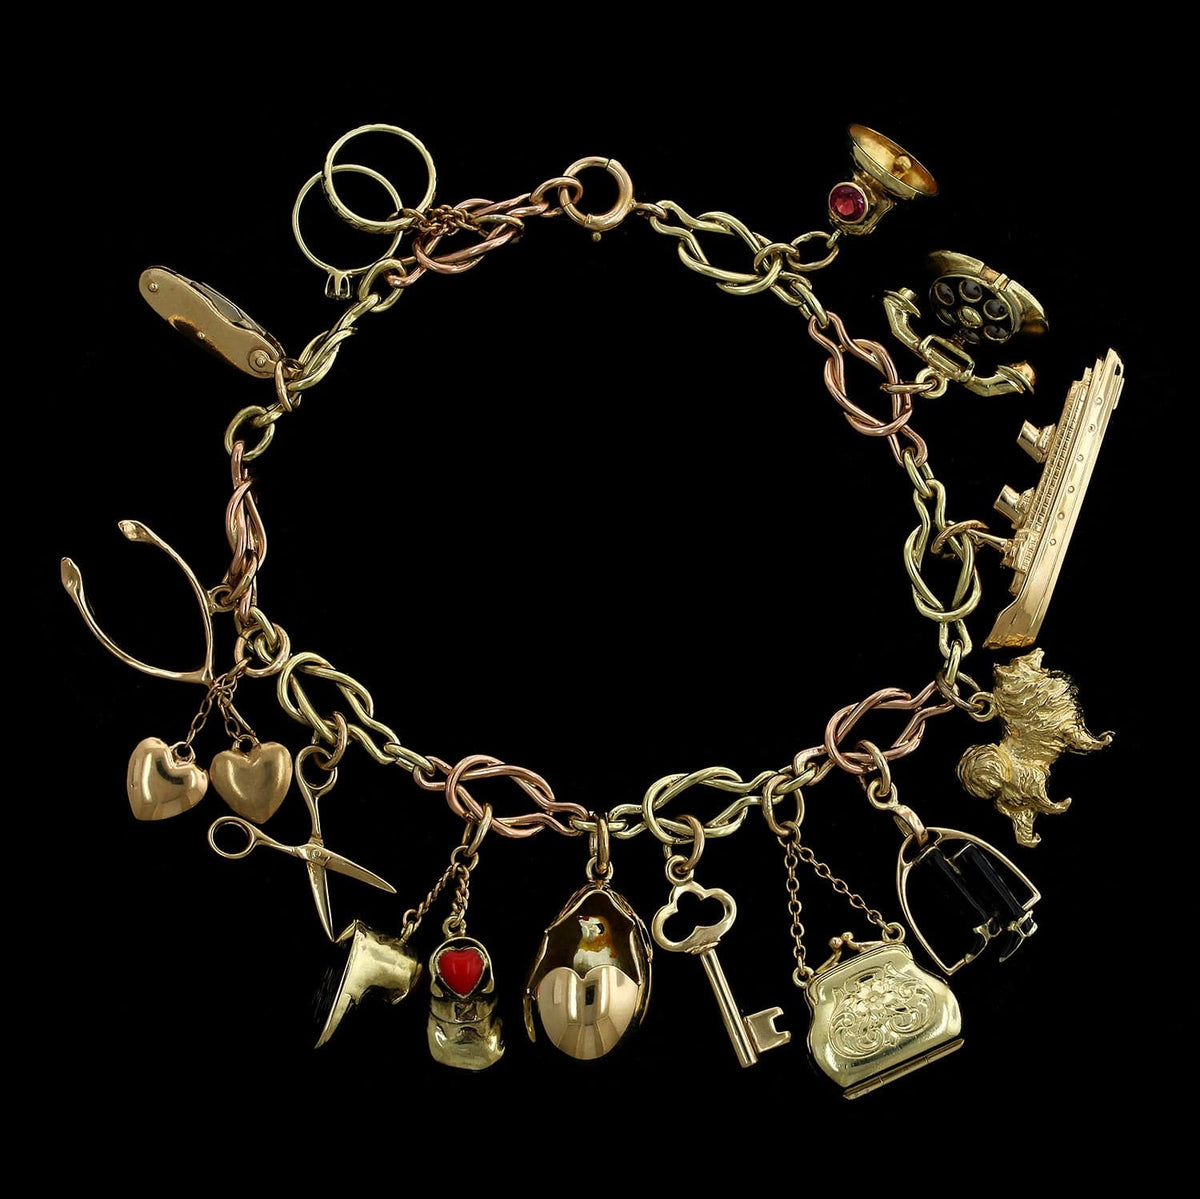 Vintage Sterling Silver Charm Bracelet With 21 Unusual Charms